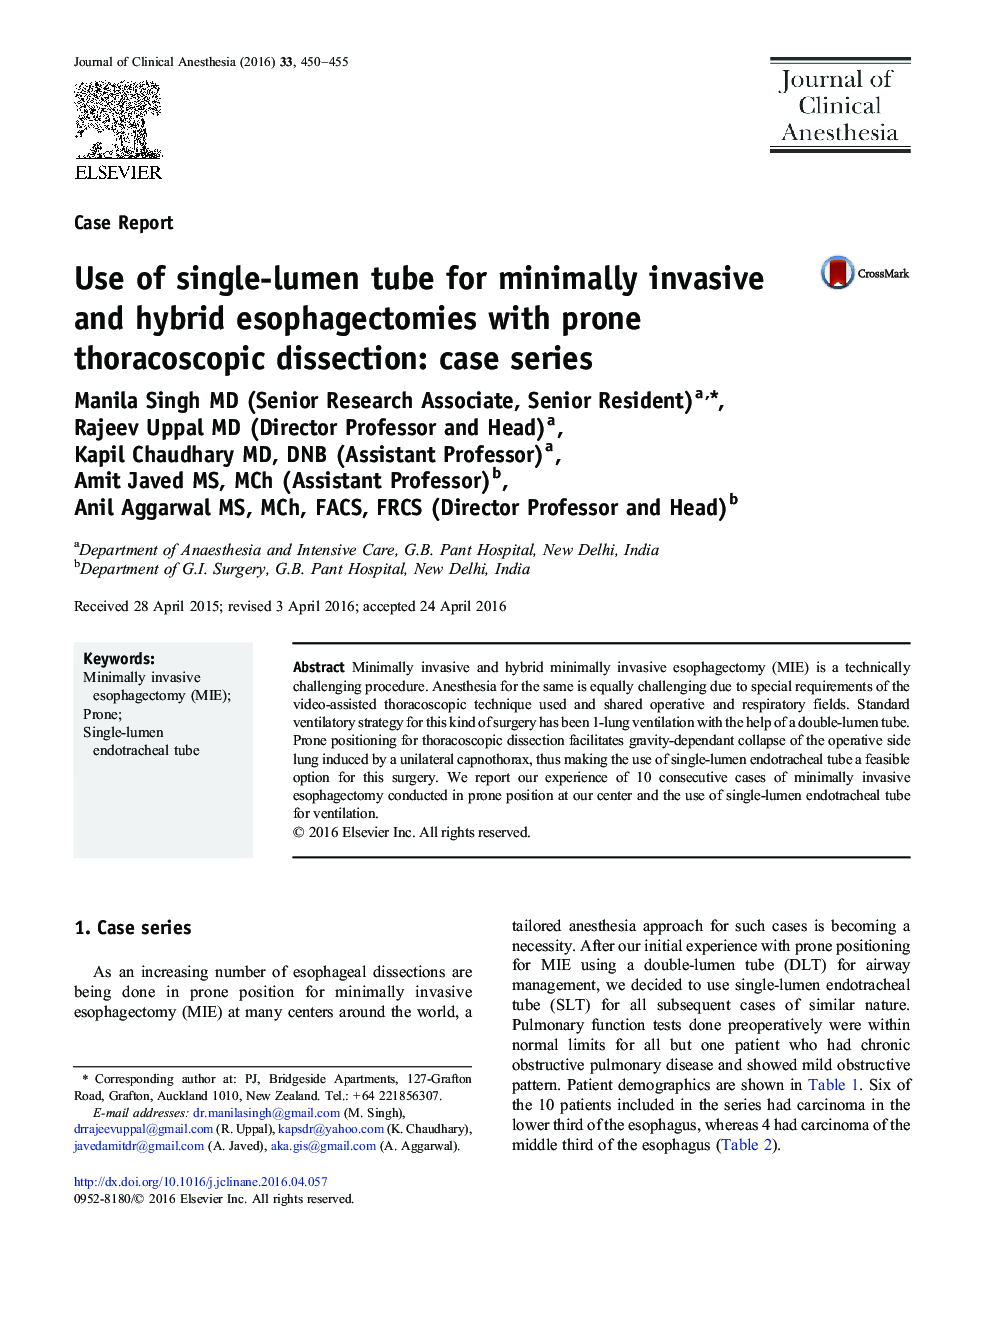 Use of single-lumen tube for minimally invasive and hybrid esophagectomies with prone thoracoscopic dissection: case series